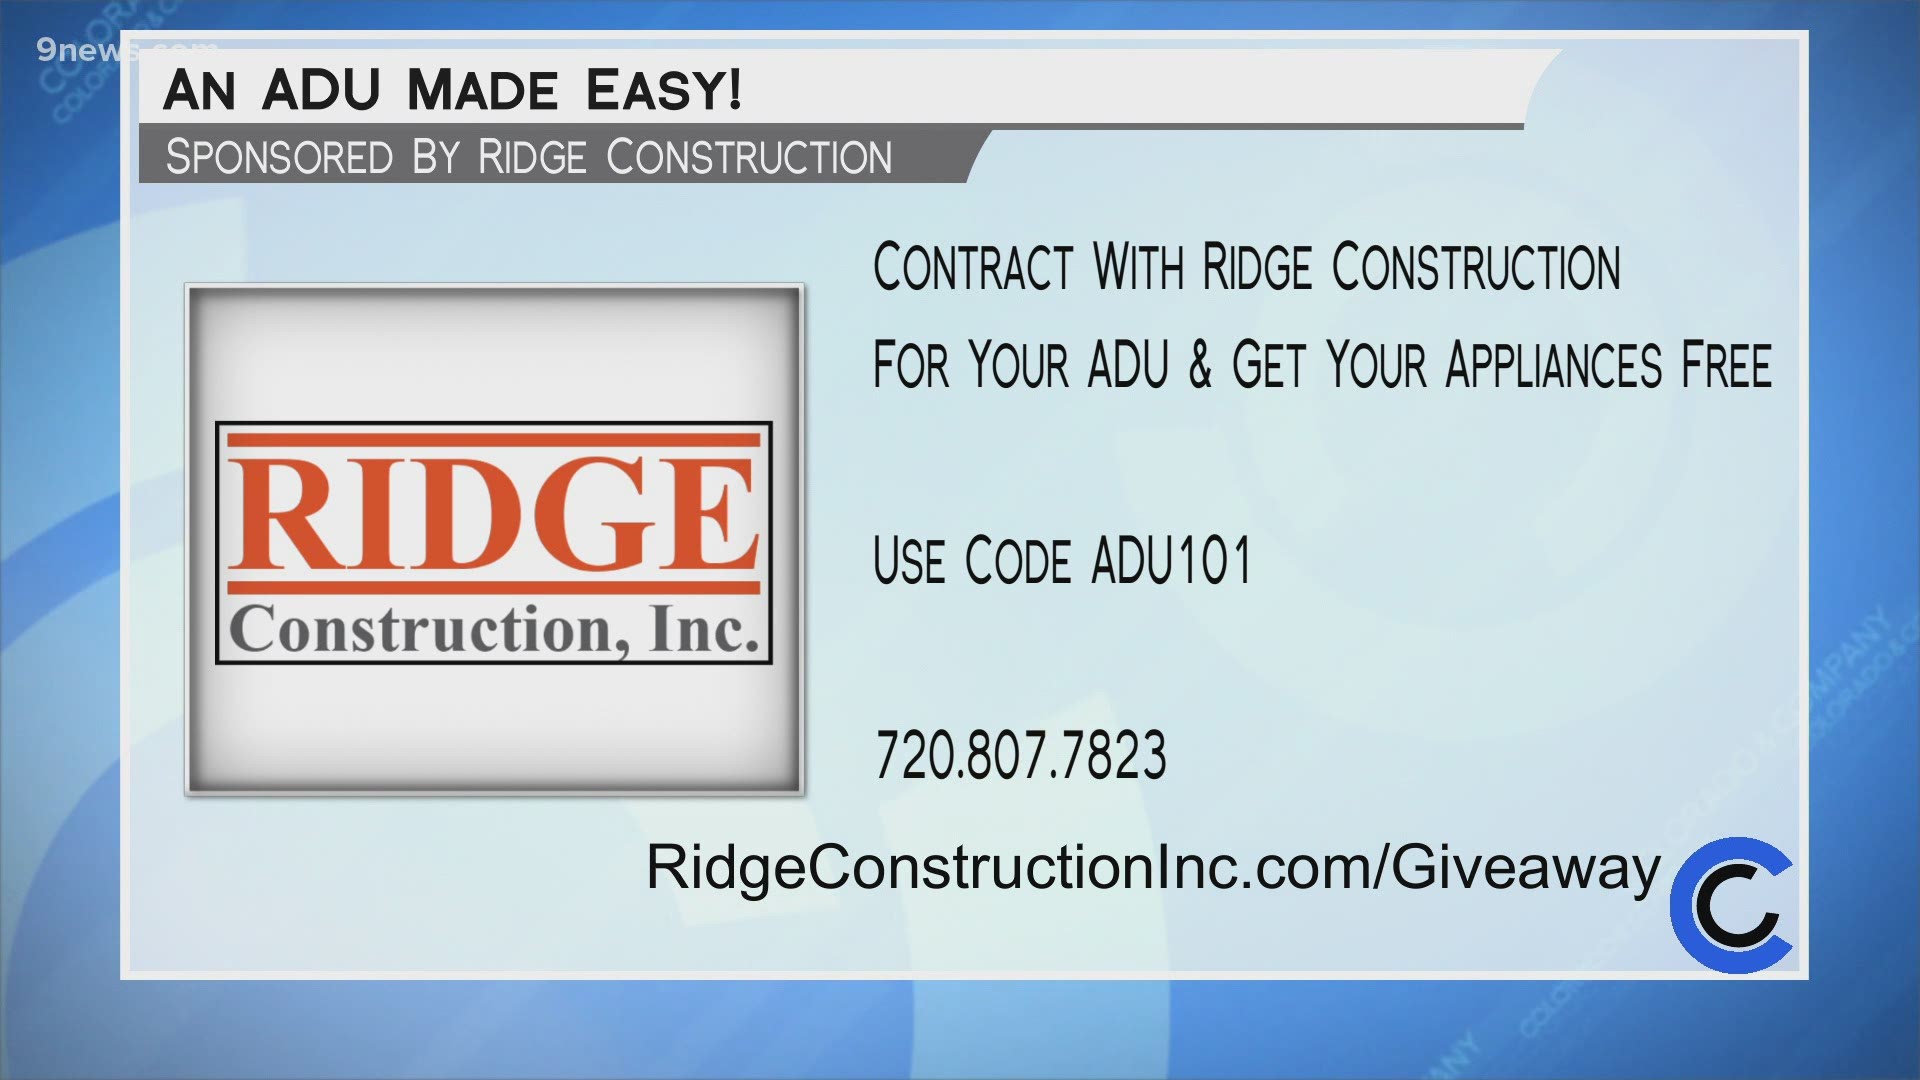 Visit RidgeConstructionInc.com/Giveaway and use code ADU 101 when filling out the form for a free appliance package with your new ADU! Call 720.807.7823 for more.